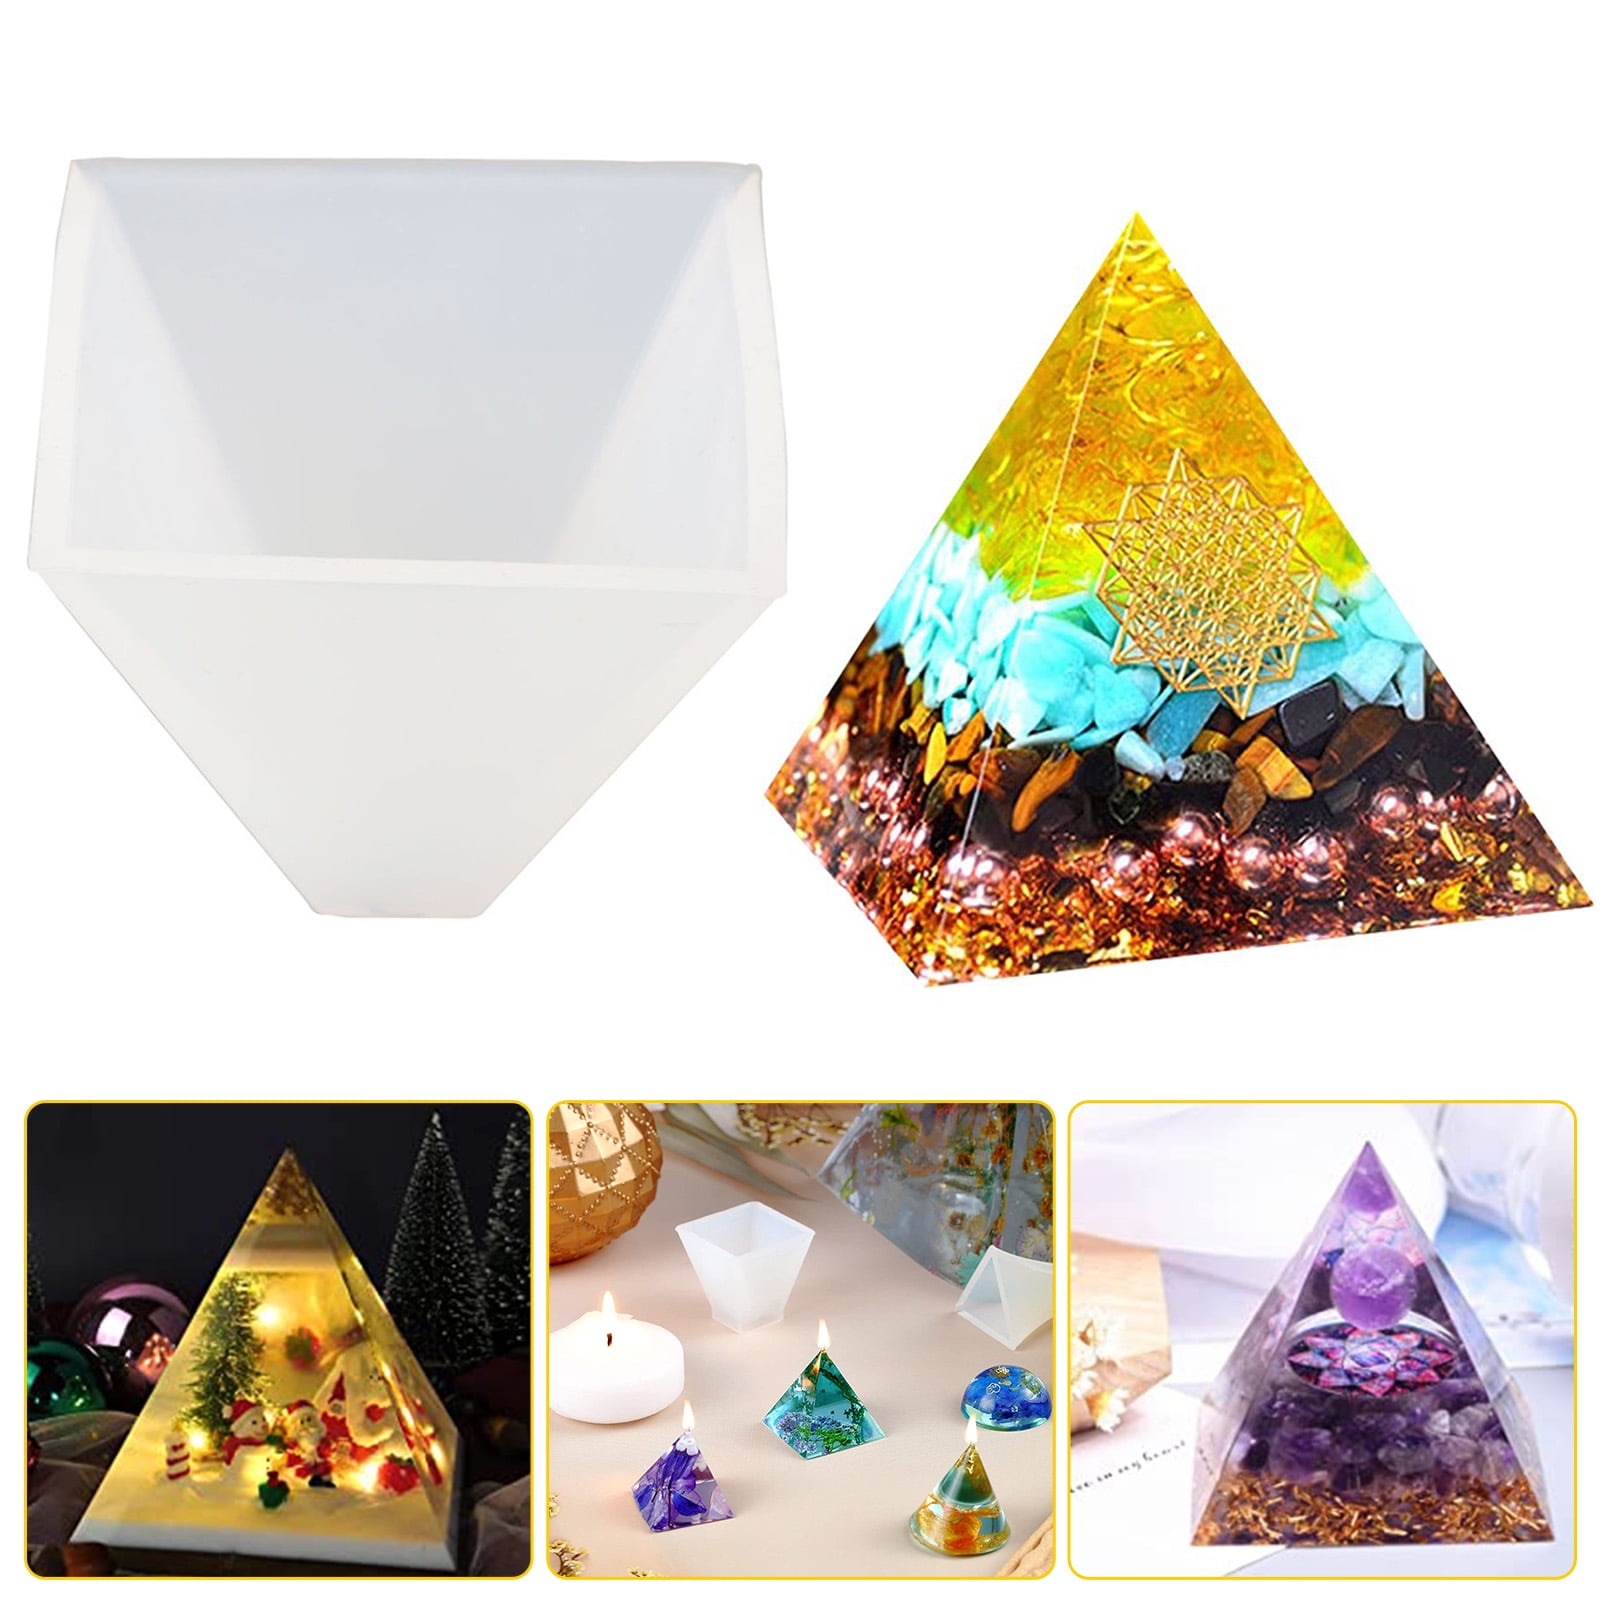 HD_ EB_ Pyramid Silicone Mold Jewelry Making DIY Resin Casting Epoxy Craft Mould